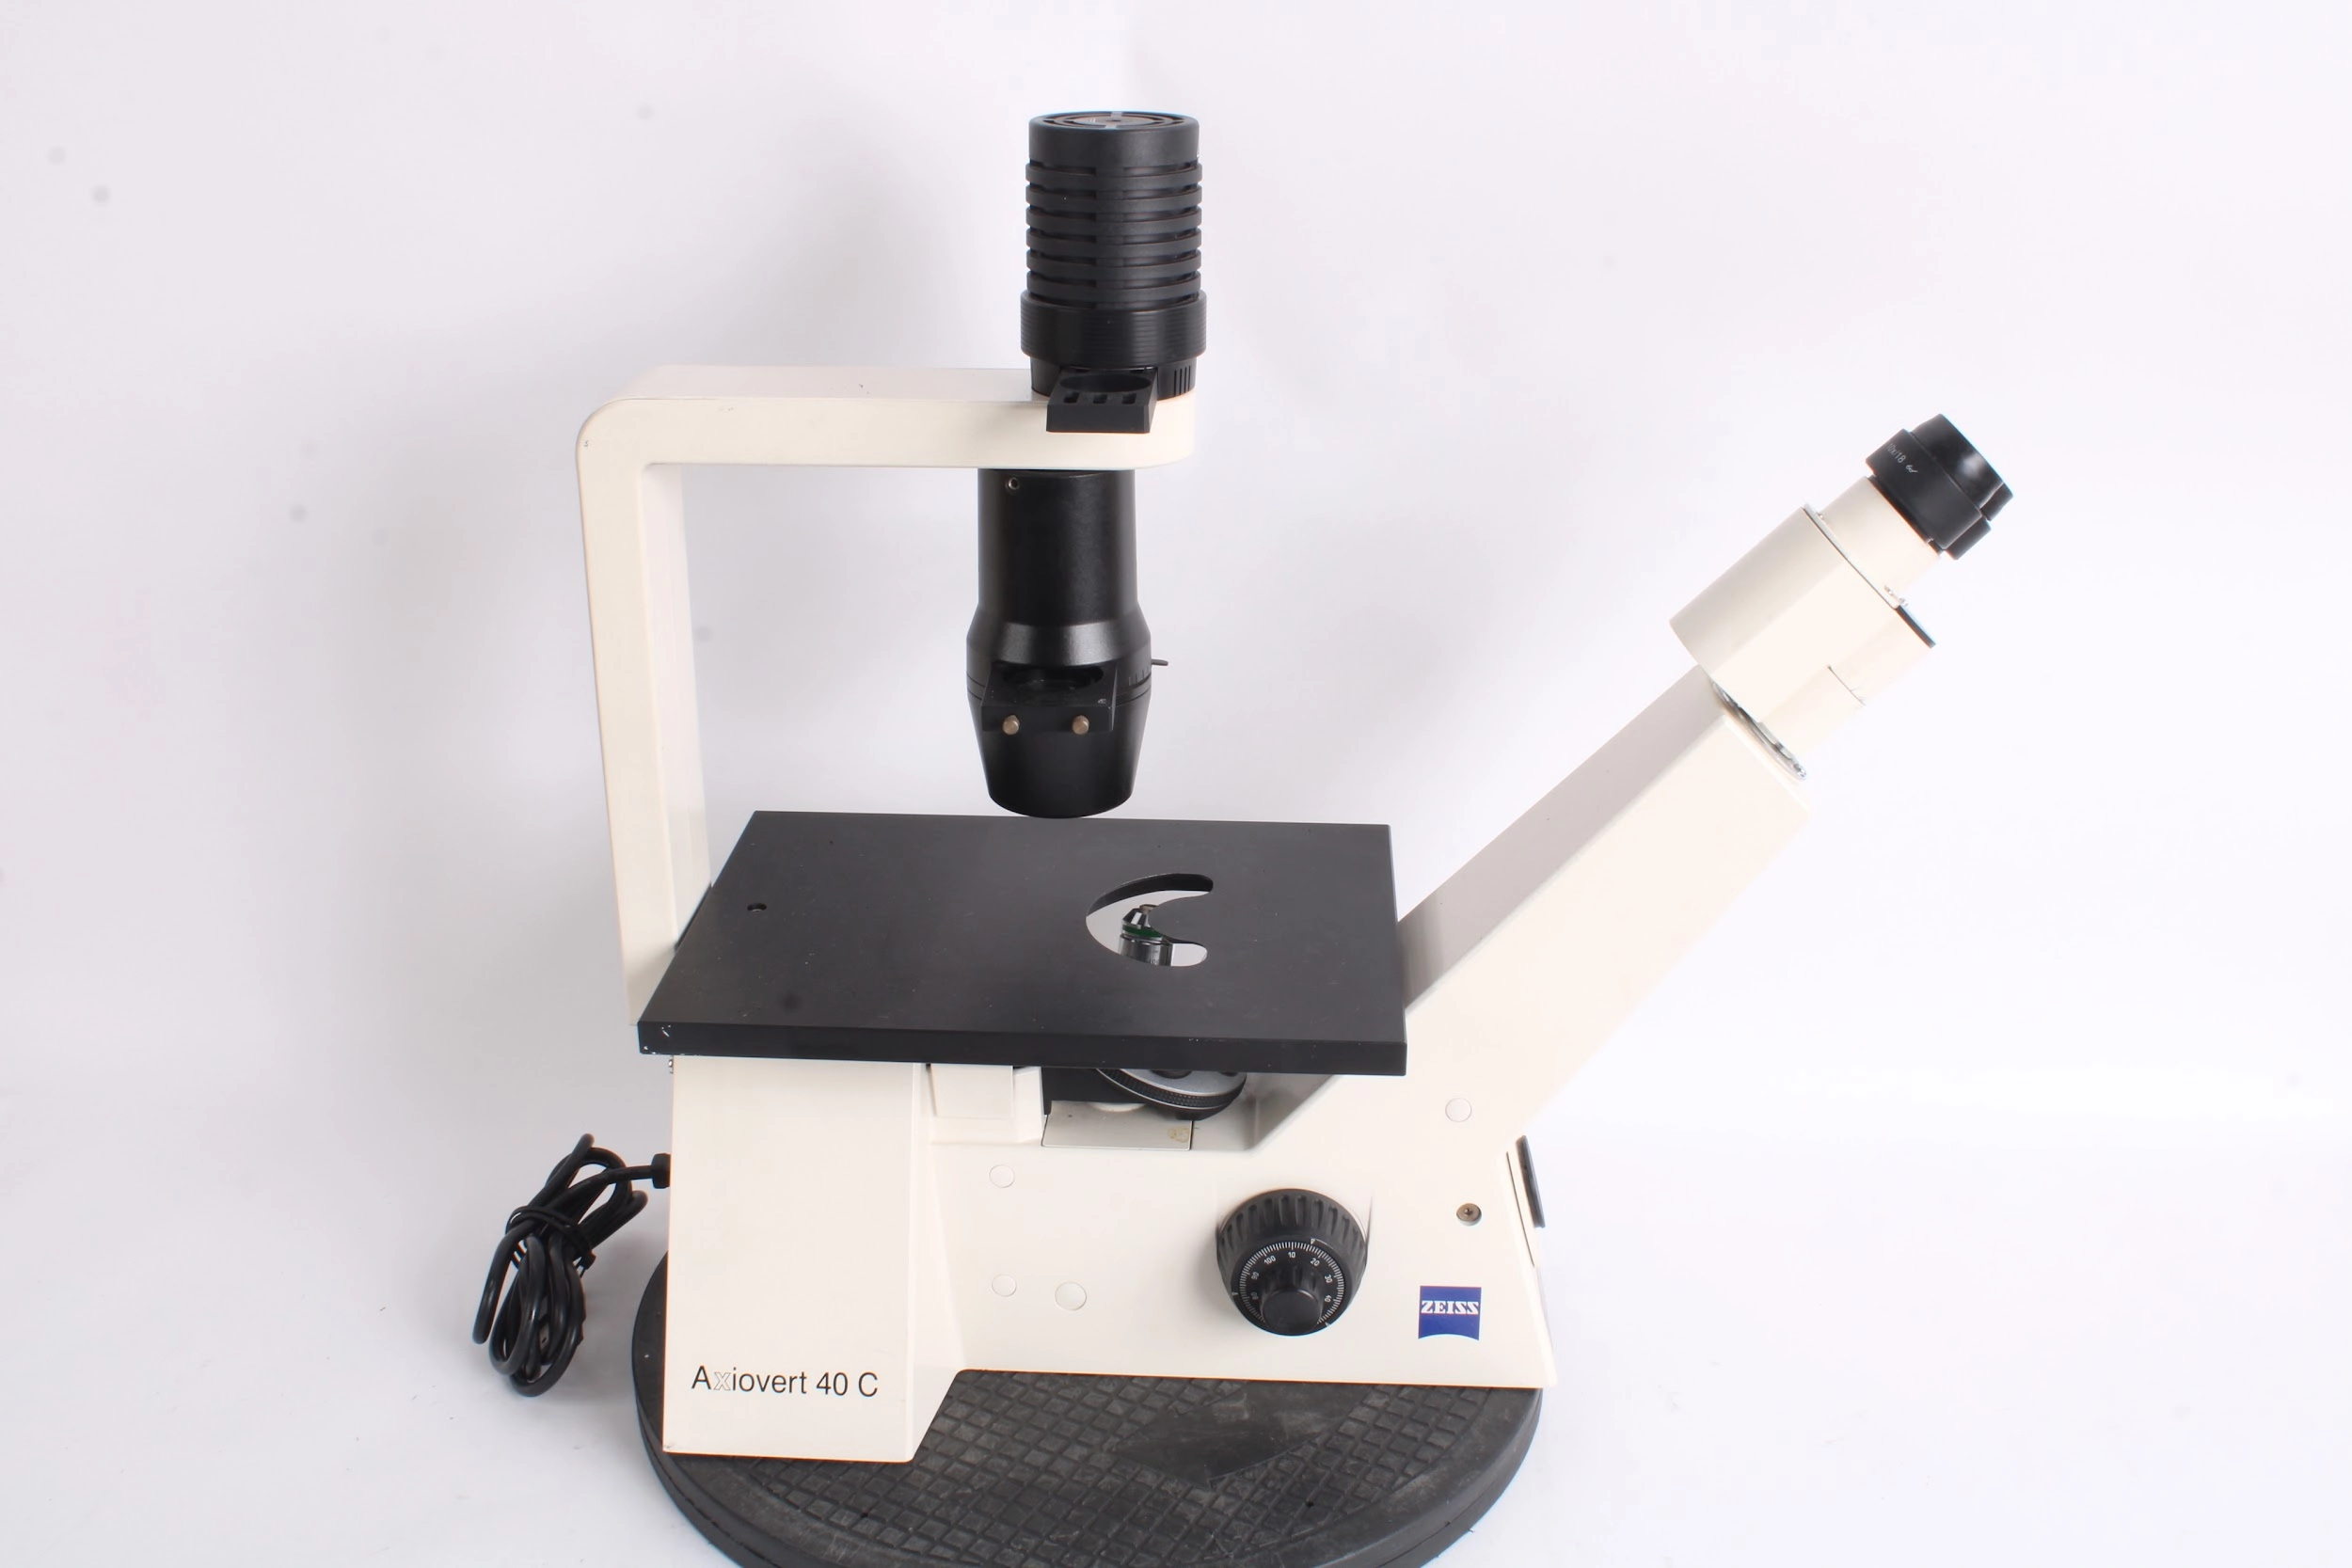 Carl Zeiss Axiovert 40 C Inverted Biological Microscope - Objective 10x, 20x